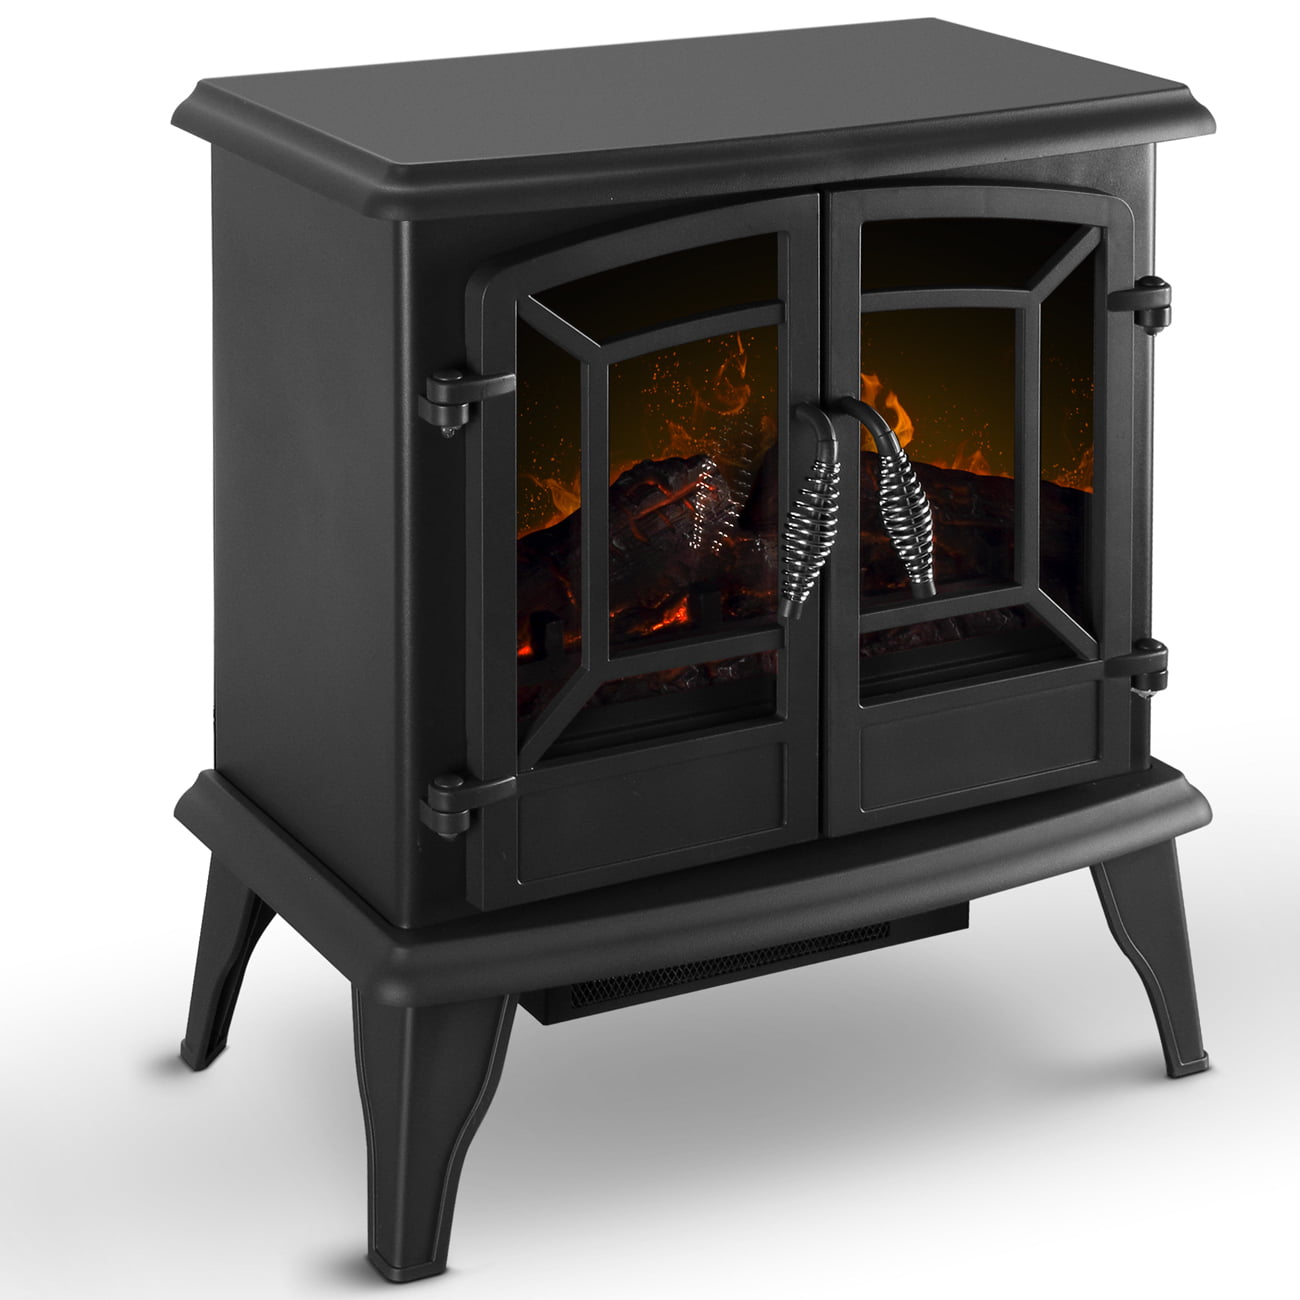 Della Electric Stove Heater Fireplace, Electric Fireplace Heater Realistic Flame And Logs With Glowing Embers